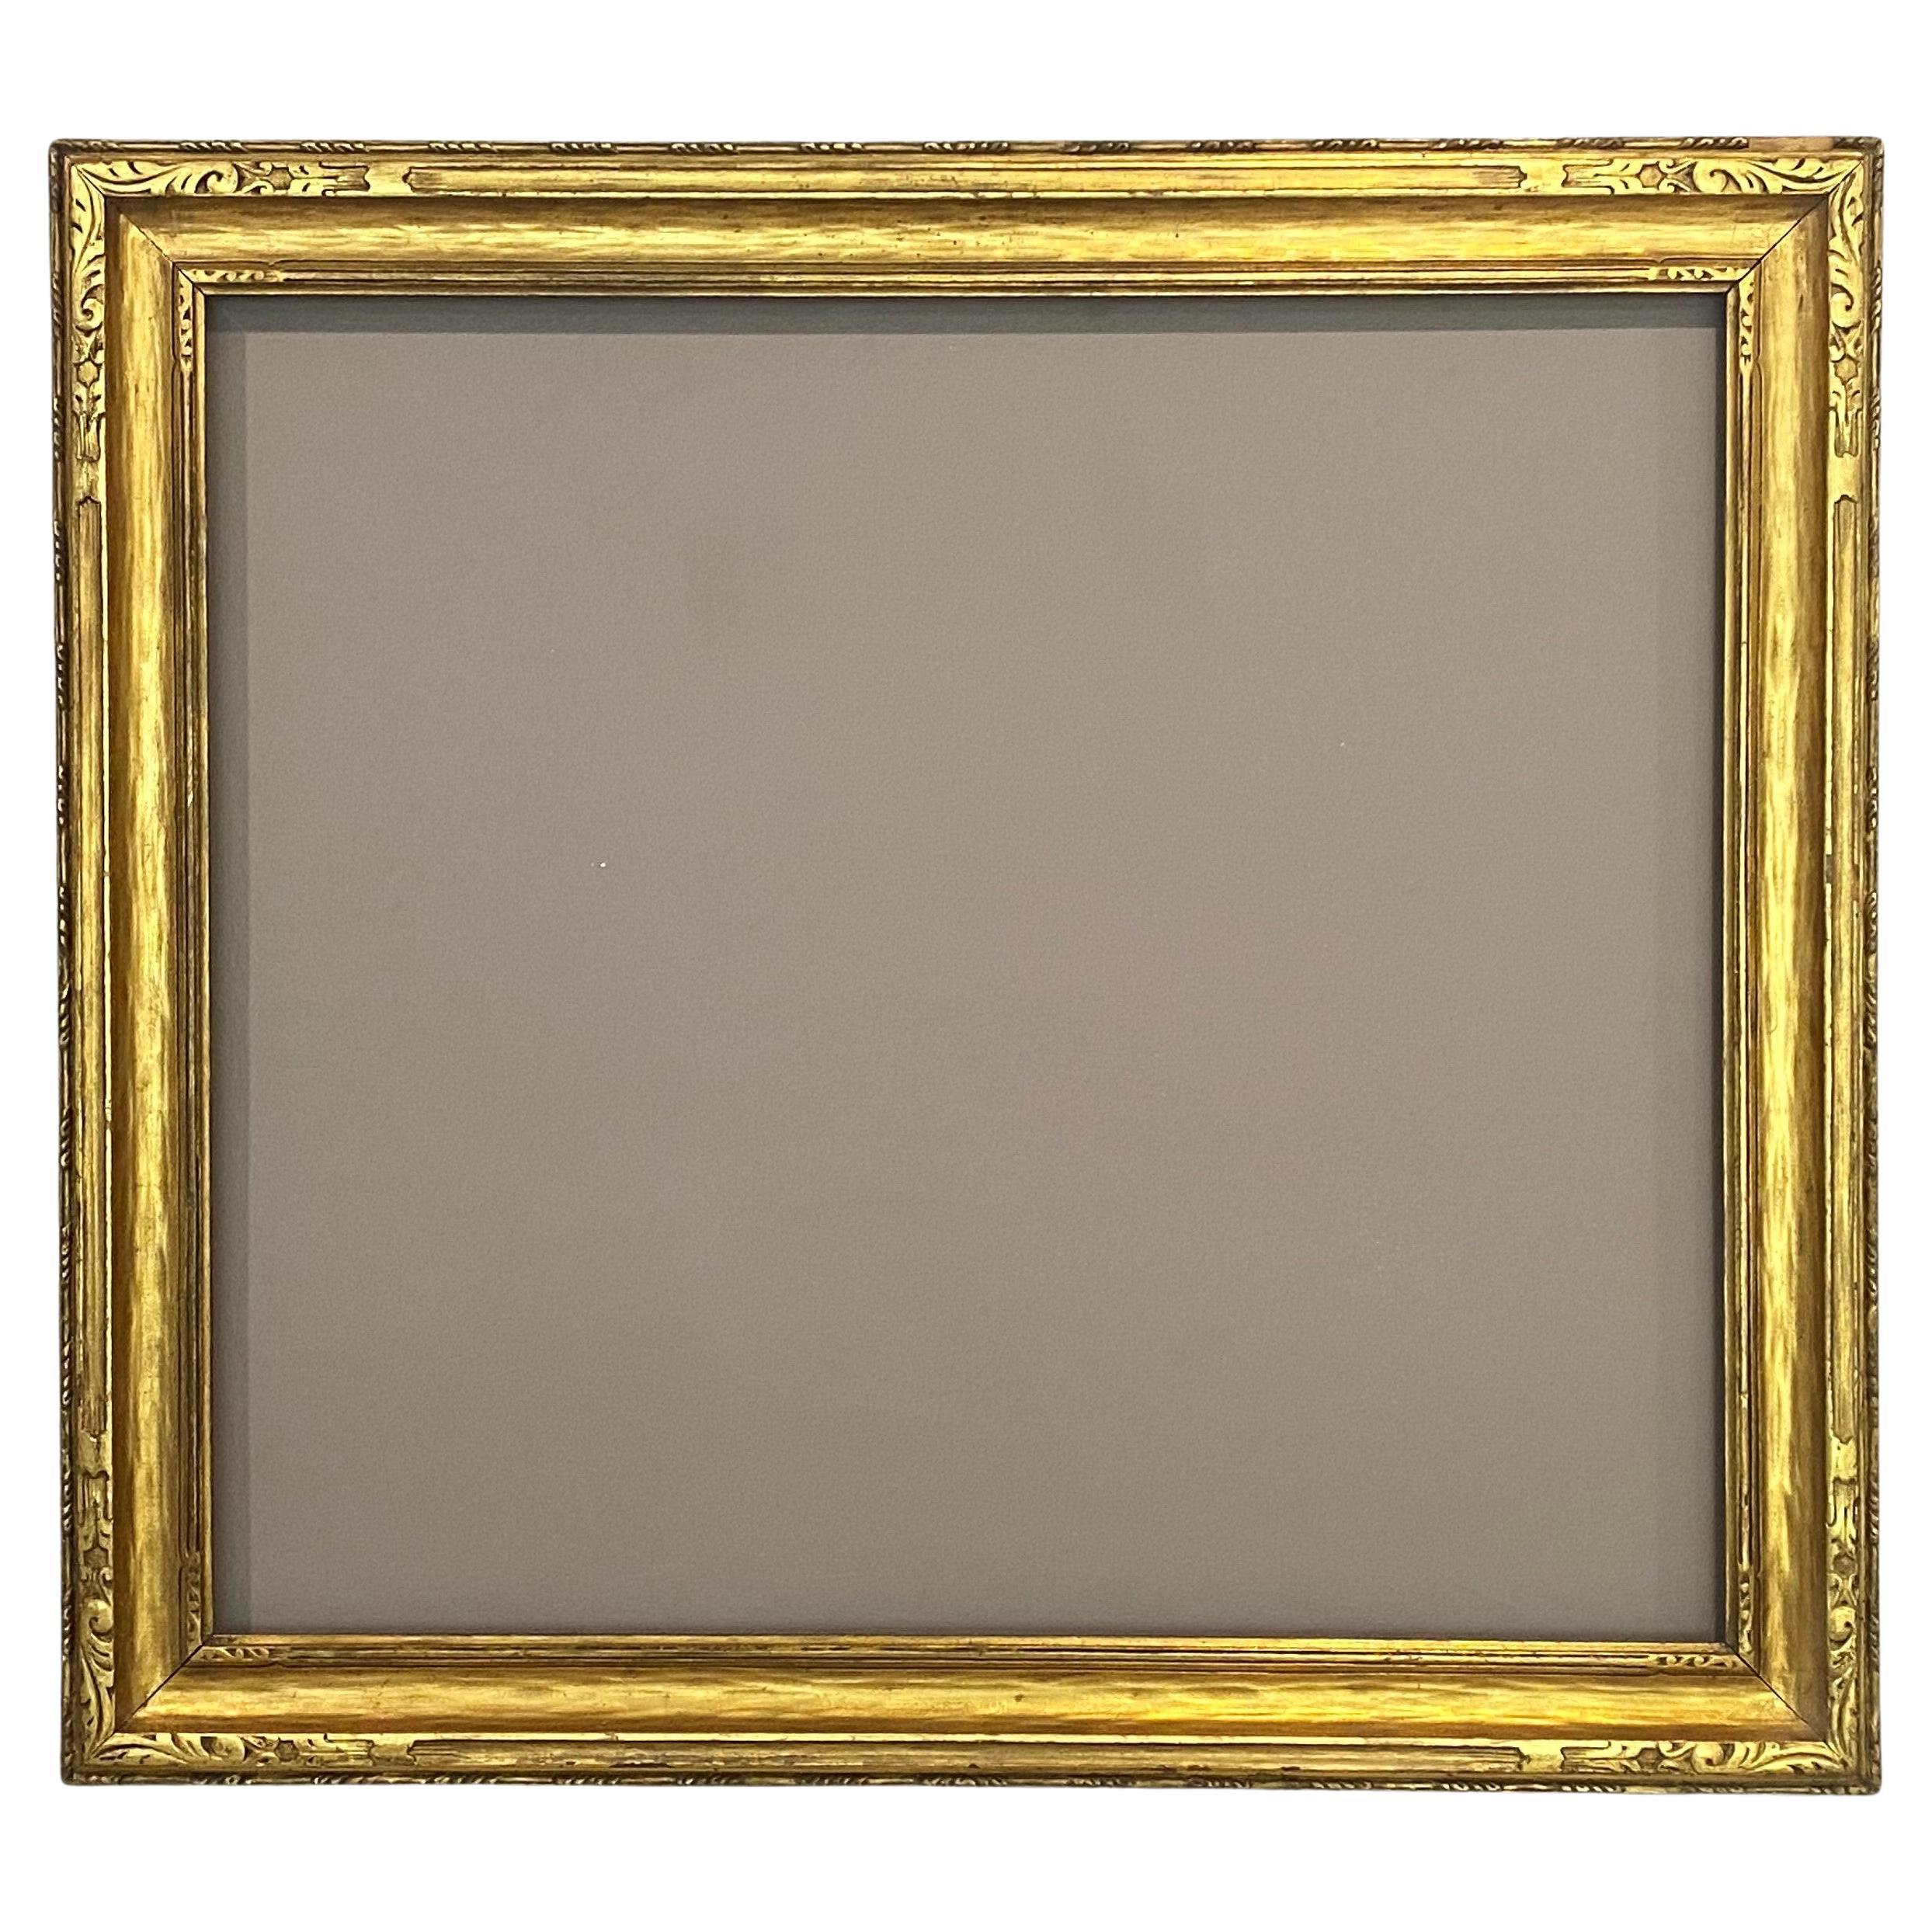 American Arts and Crafts Carved and Gilded Frame, circa 1920